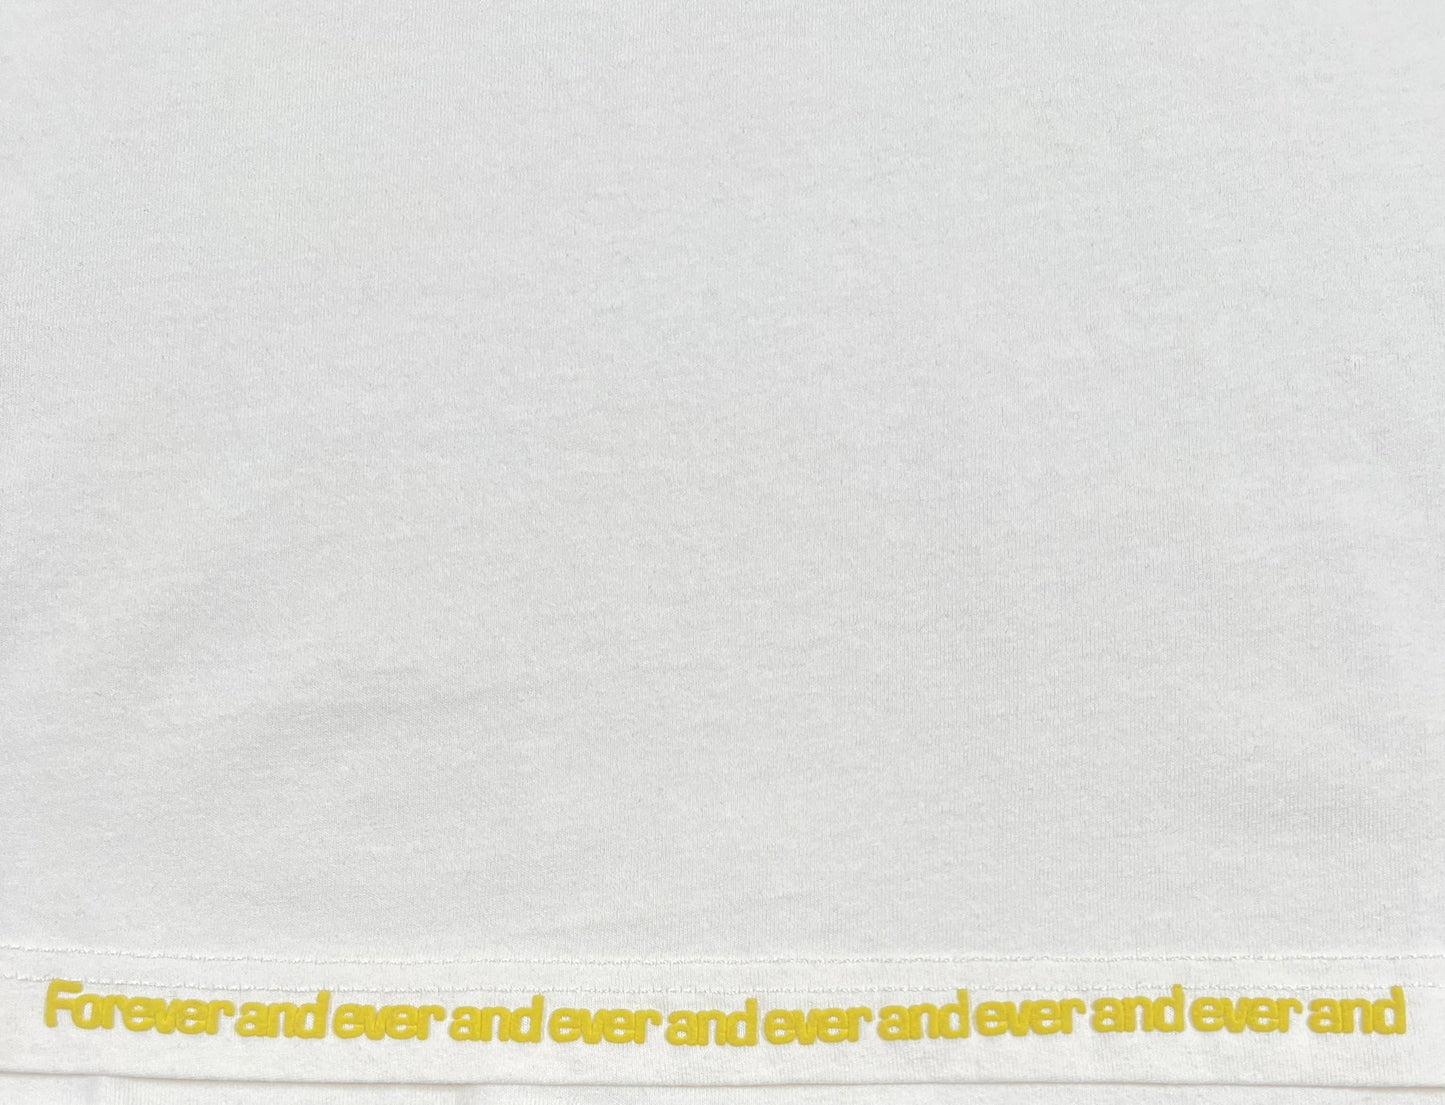 A repetitive text pattern saying "forever and ever and ever and ever and ever and" printed on a 100% cotton white fabric background of a DIESEL T-RUST T-SHIRT.